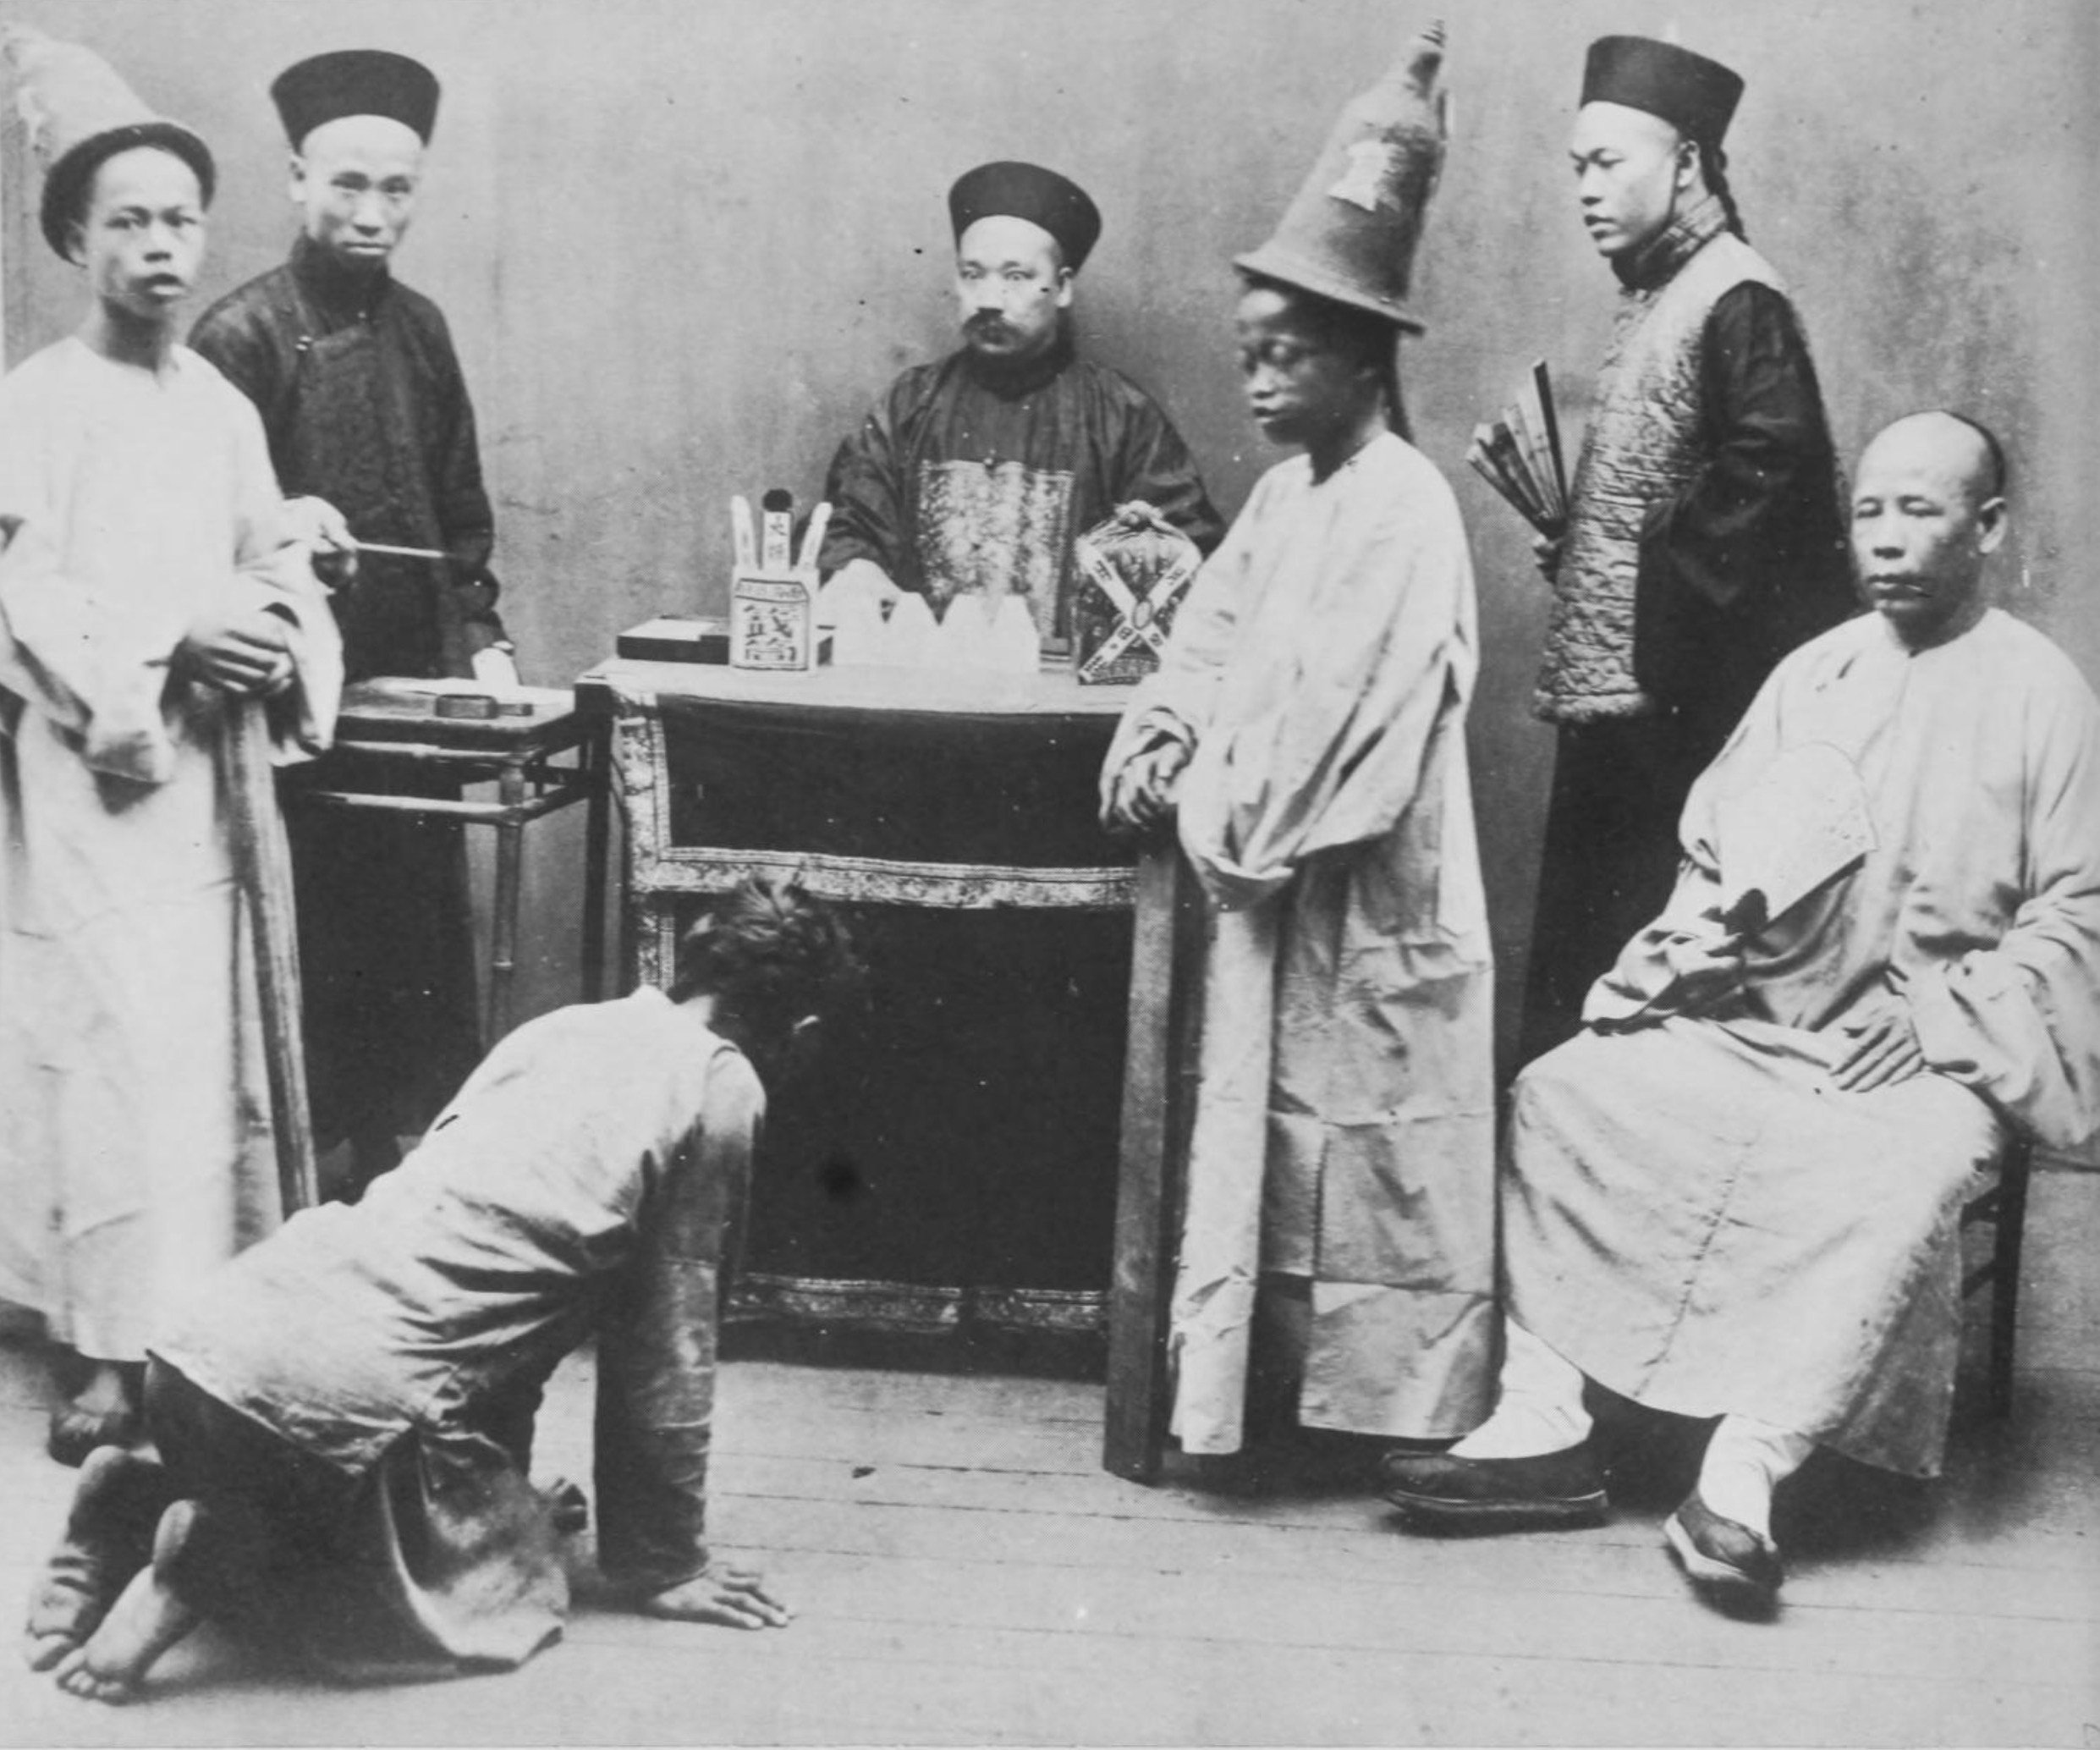 A photograph from “Hong Kong 100 Years Ago - A Picture-Story of Hong Kong in 1870” showing a Chinese court of justice in the then British colony with district magistrate, clerks, court policemen, the accused and a prosecutor (seated). 